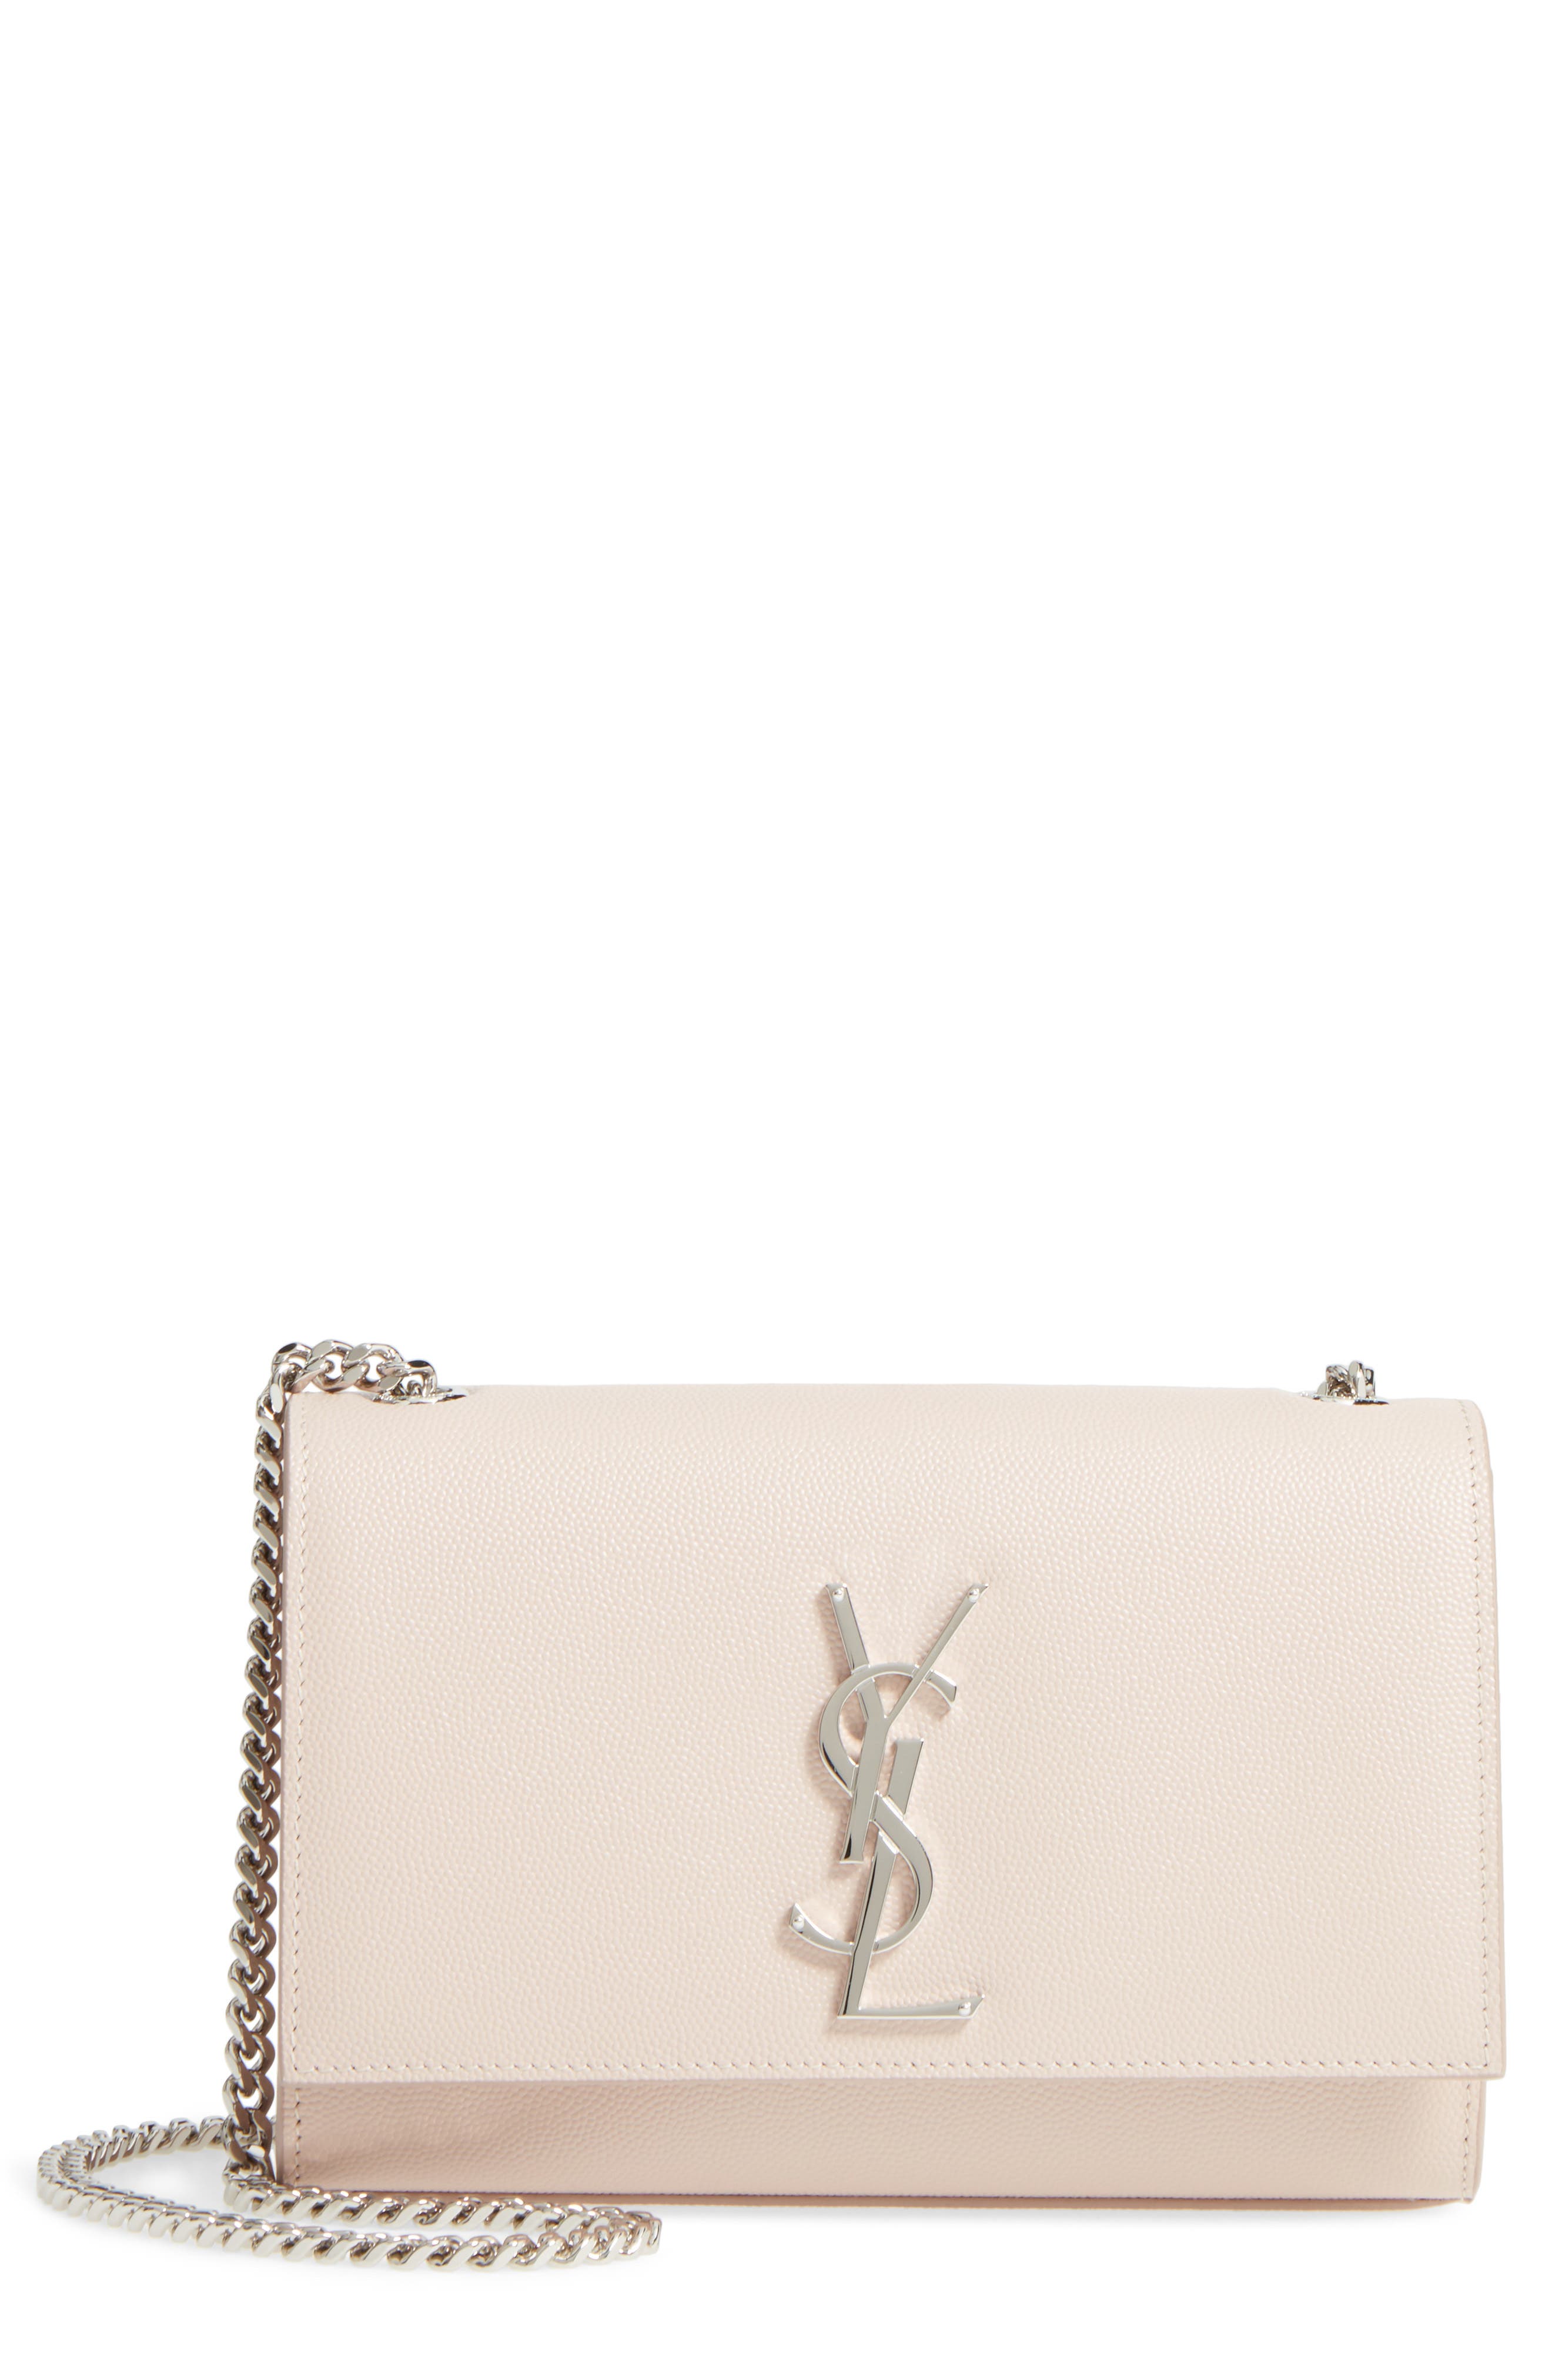 Saint Laurent Small Kate Grained Leather Crossbody Bag In Marble Pink